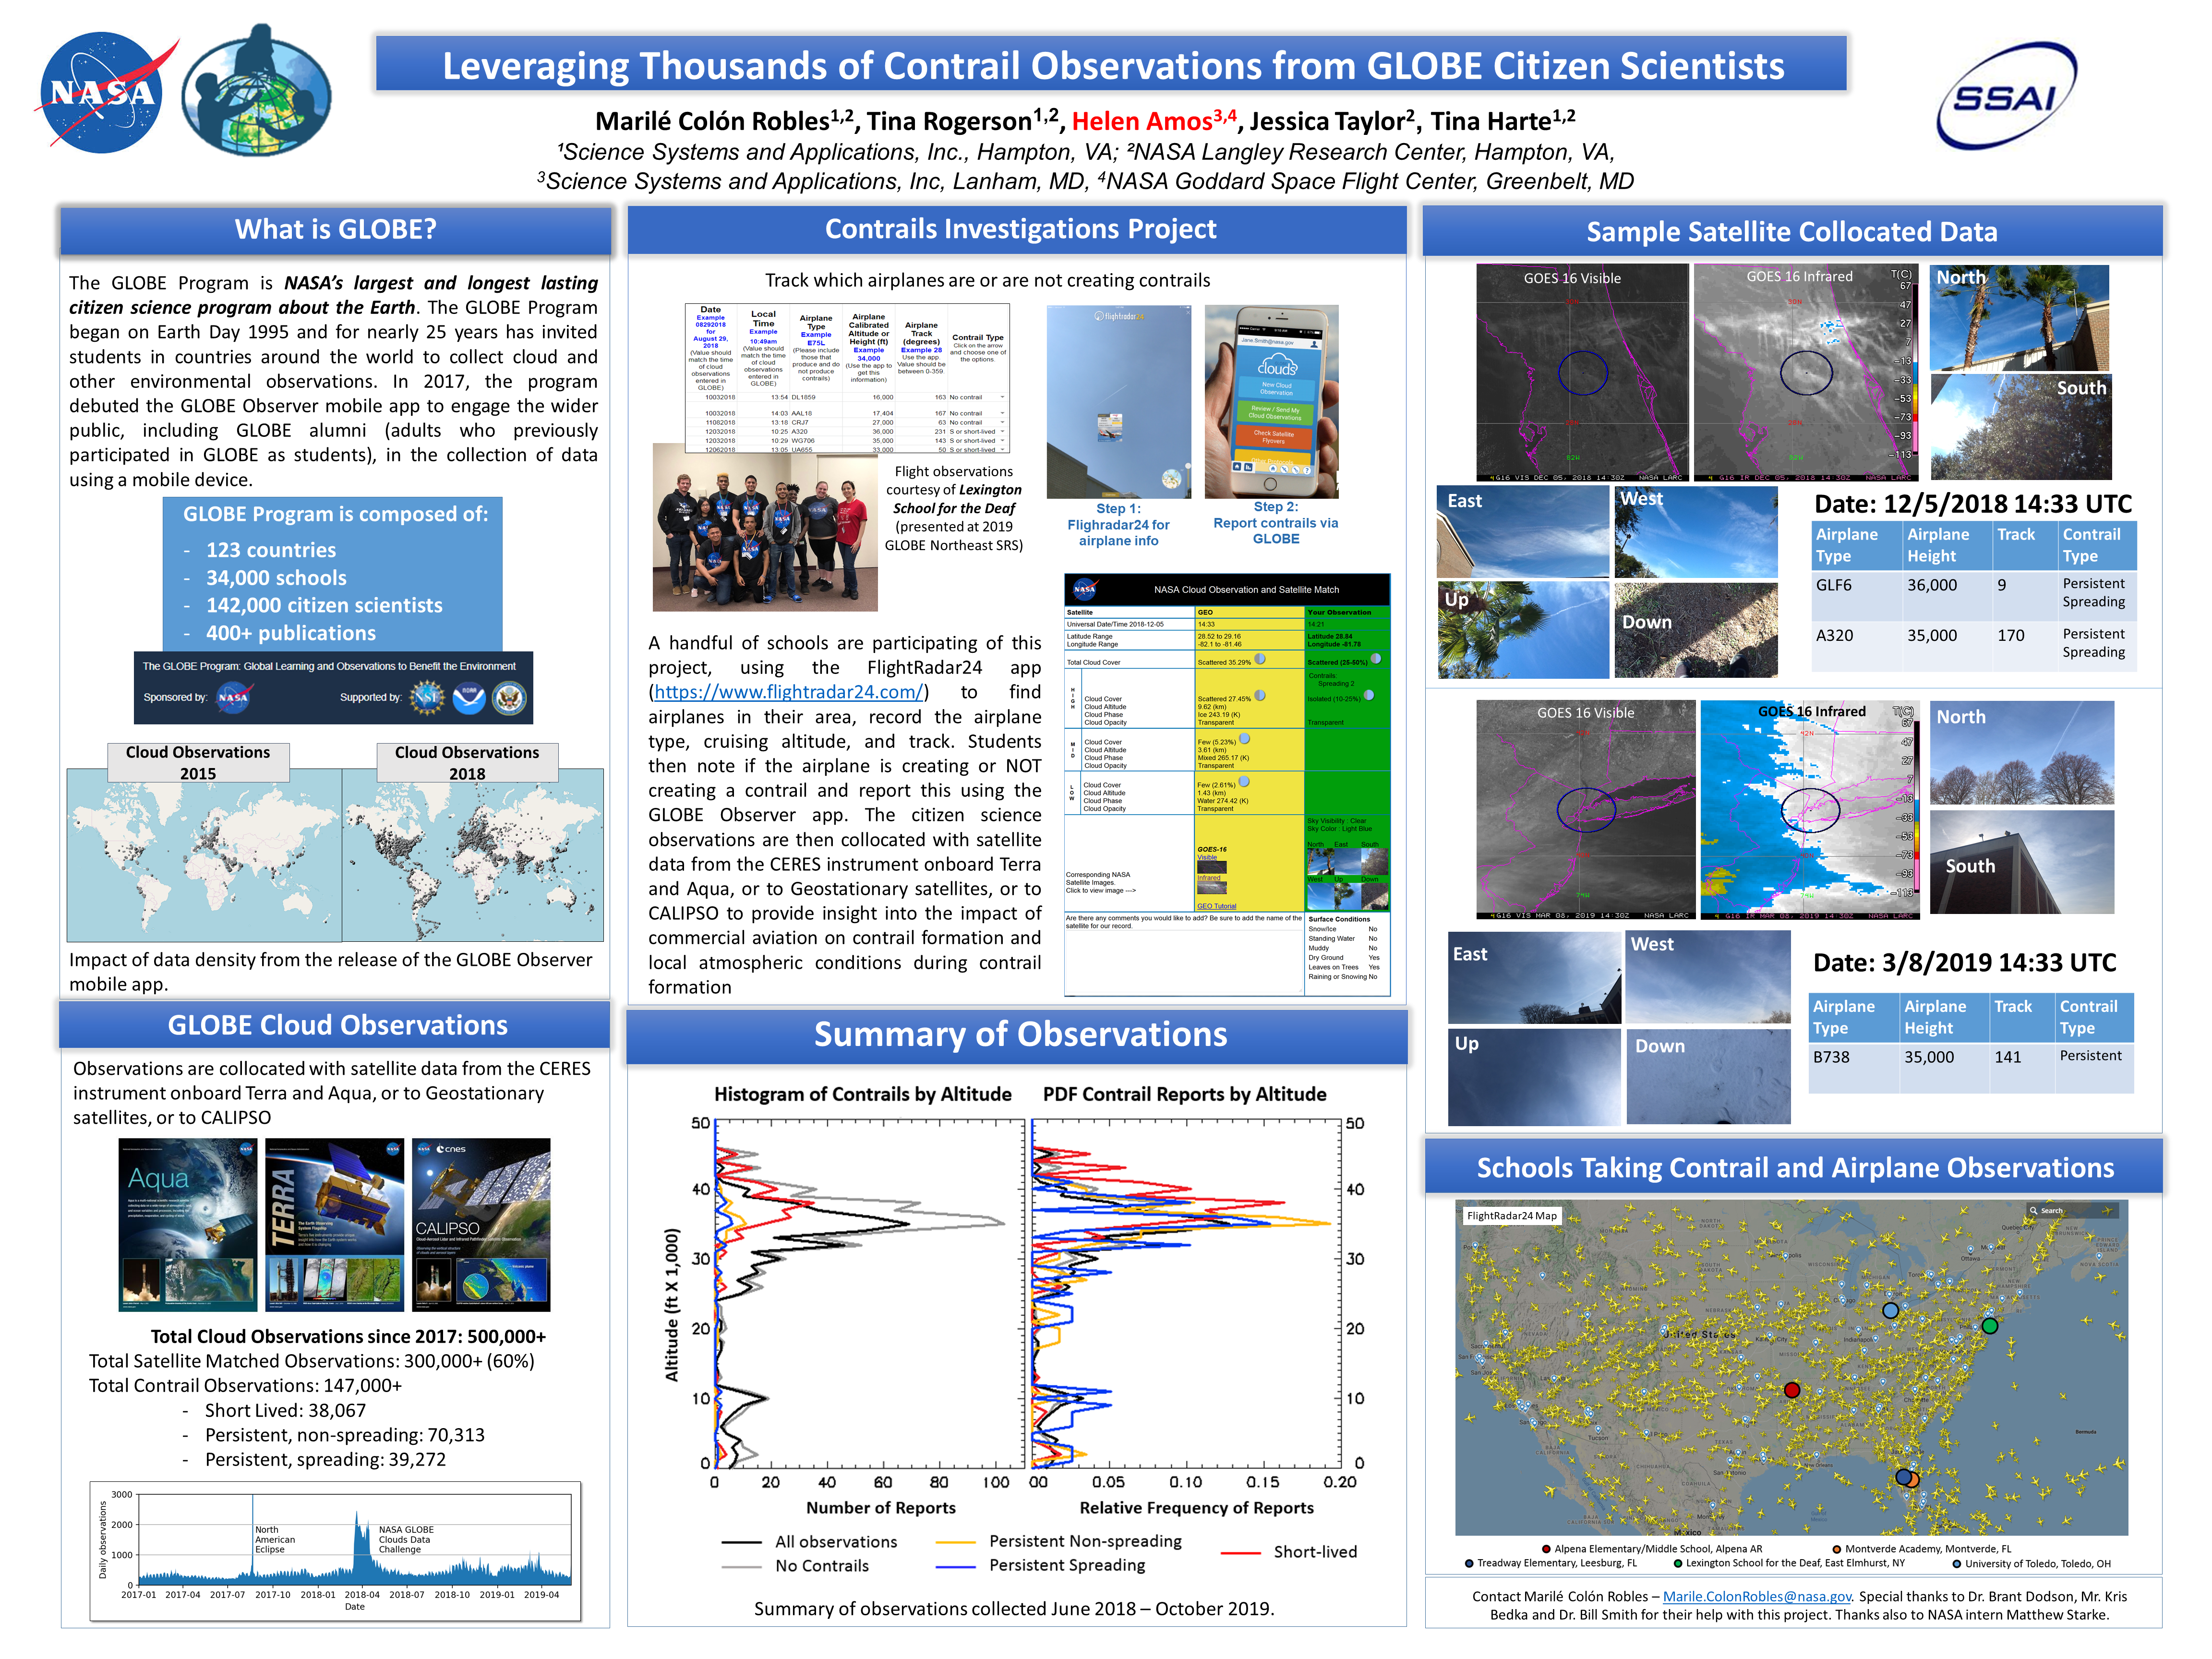 "Leveraging Thousands of Contrail Observations from GLOBE Citizen Scientists" Poster